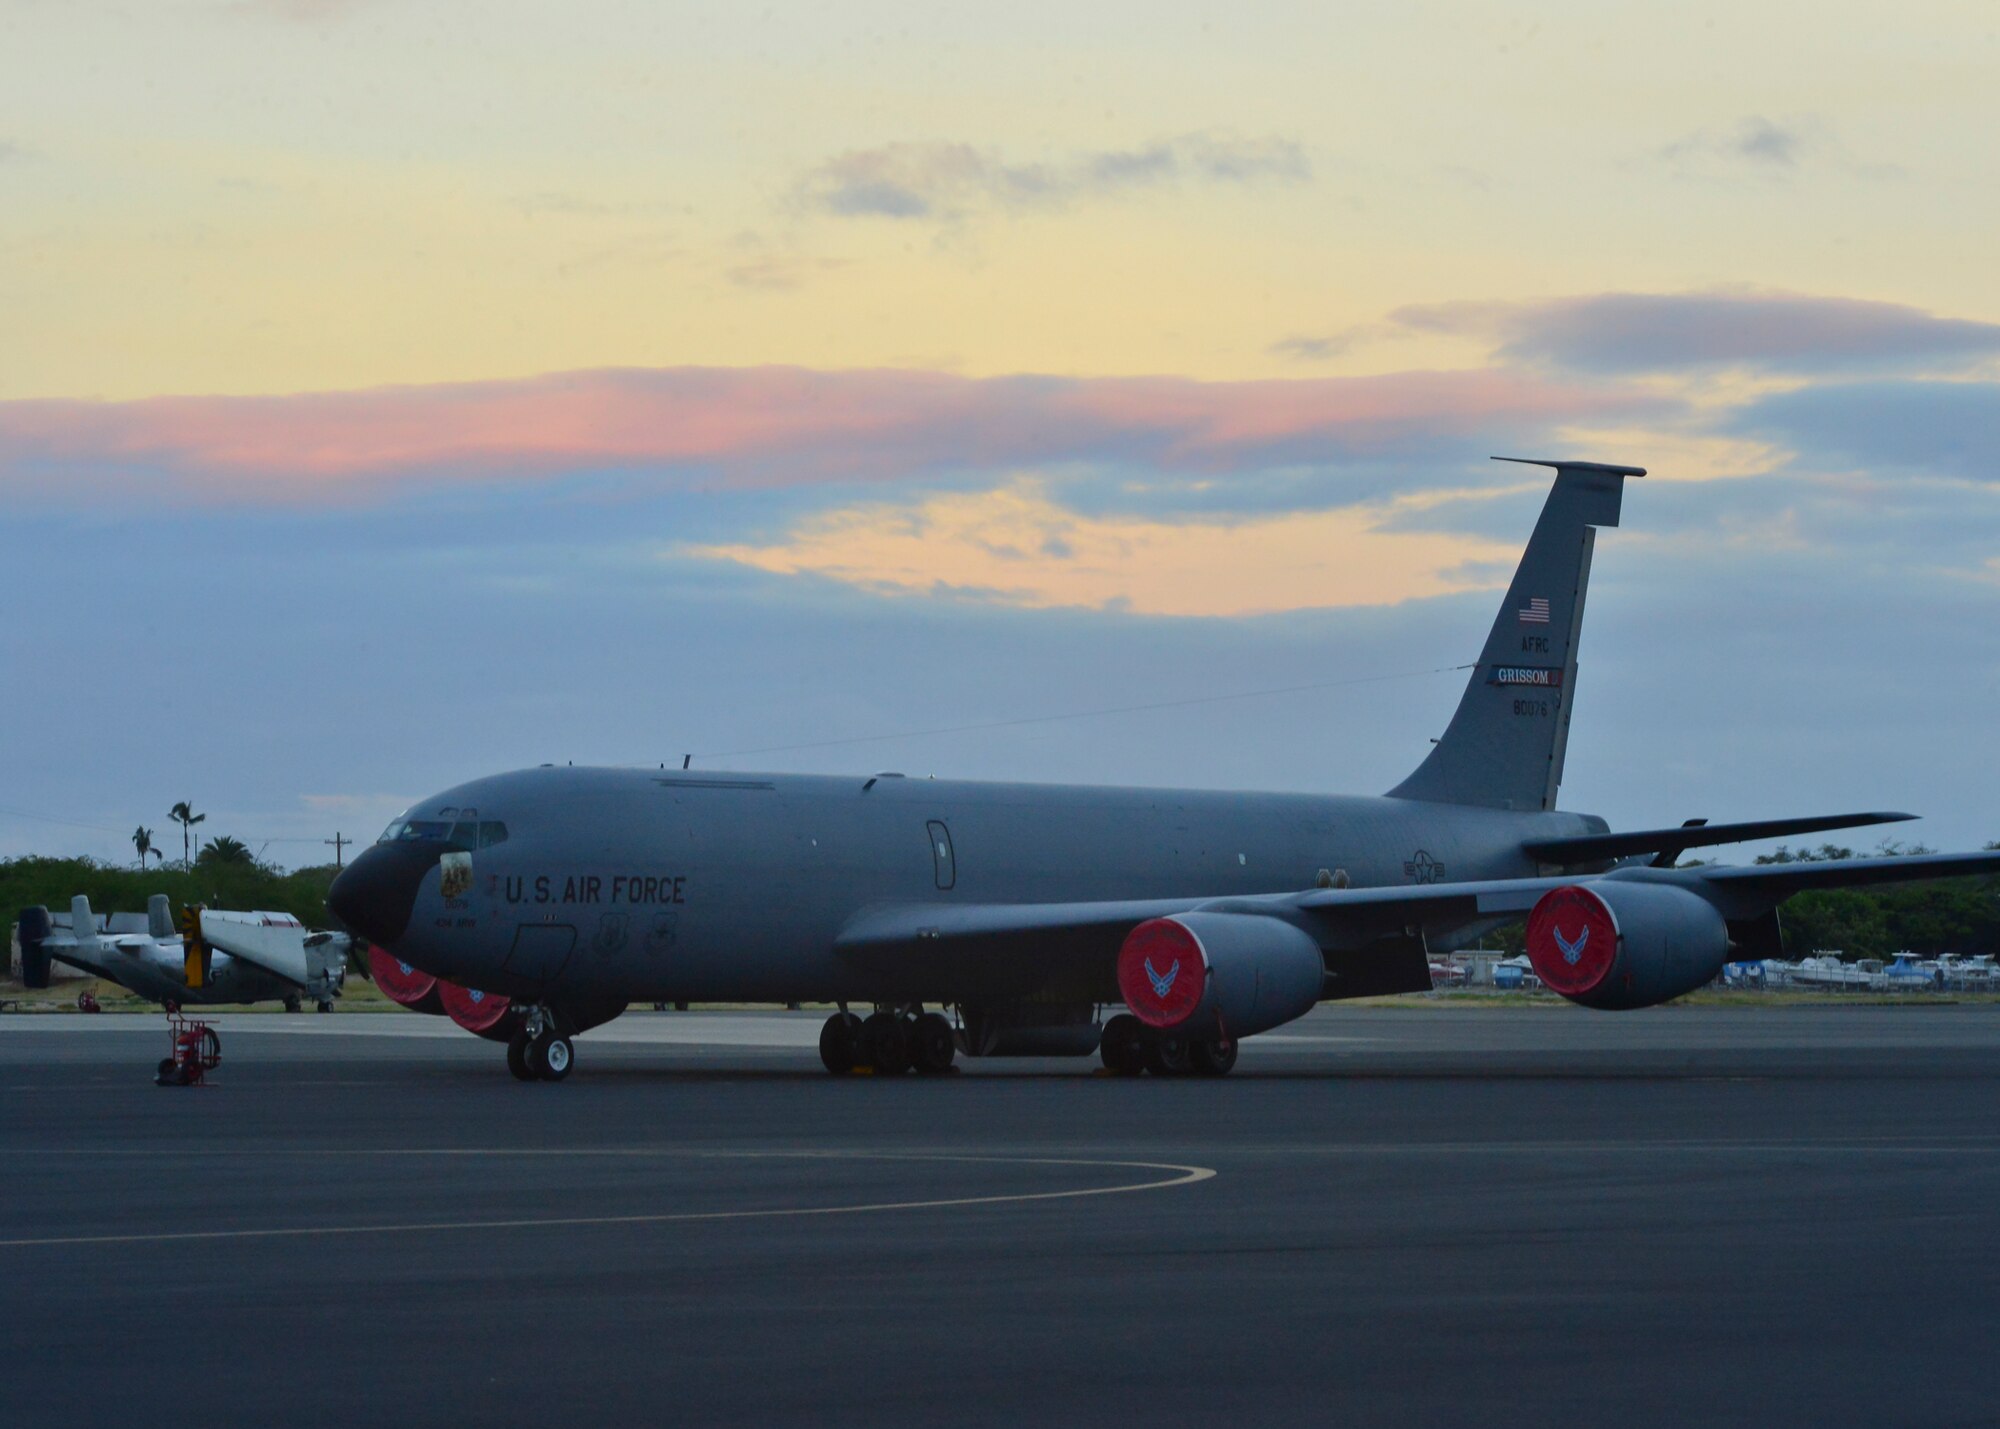 KC-135R Stratotanker's operated and maintained by Citizen Airmen from the 507th Air Refueling Wing arrived in Hawaii July 7, 2016 to support the Rim of the Pacific Exercise also known as RIMPAC.  The Oklahoma Reservists join forces with over twenty-six nations, 49 ships, six submarines, about 200 aircraft, and 25,000 personnel who are participating in RIMPAC from June 29 to Aug. 4 in and around the Hawaiian Islands and Southern California. The world's largest international maritime exercise, RIMPAC provides a unique training opportunity while fostering and sustaining cooperative relationships between participants critical to ensuring the safety of sea lanes and security on the world's oceans. (U.S. Air Force Photo/Tech Sgt. Aaron Oelrich)